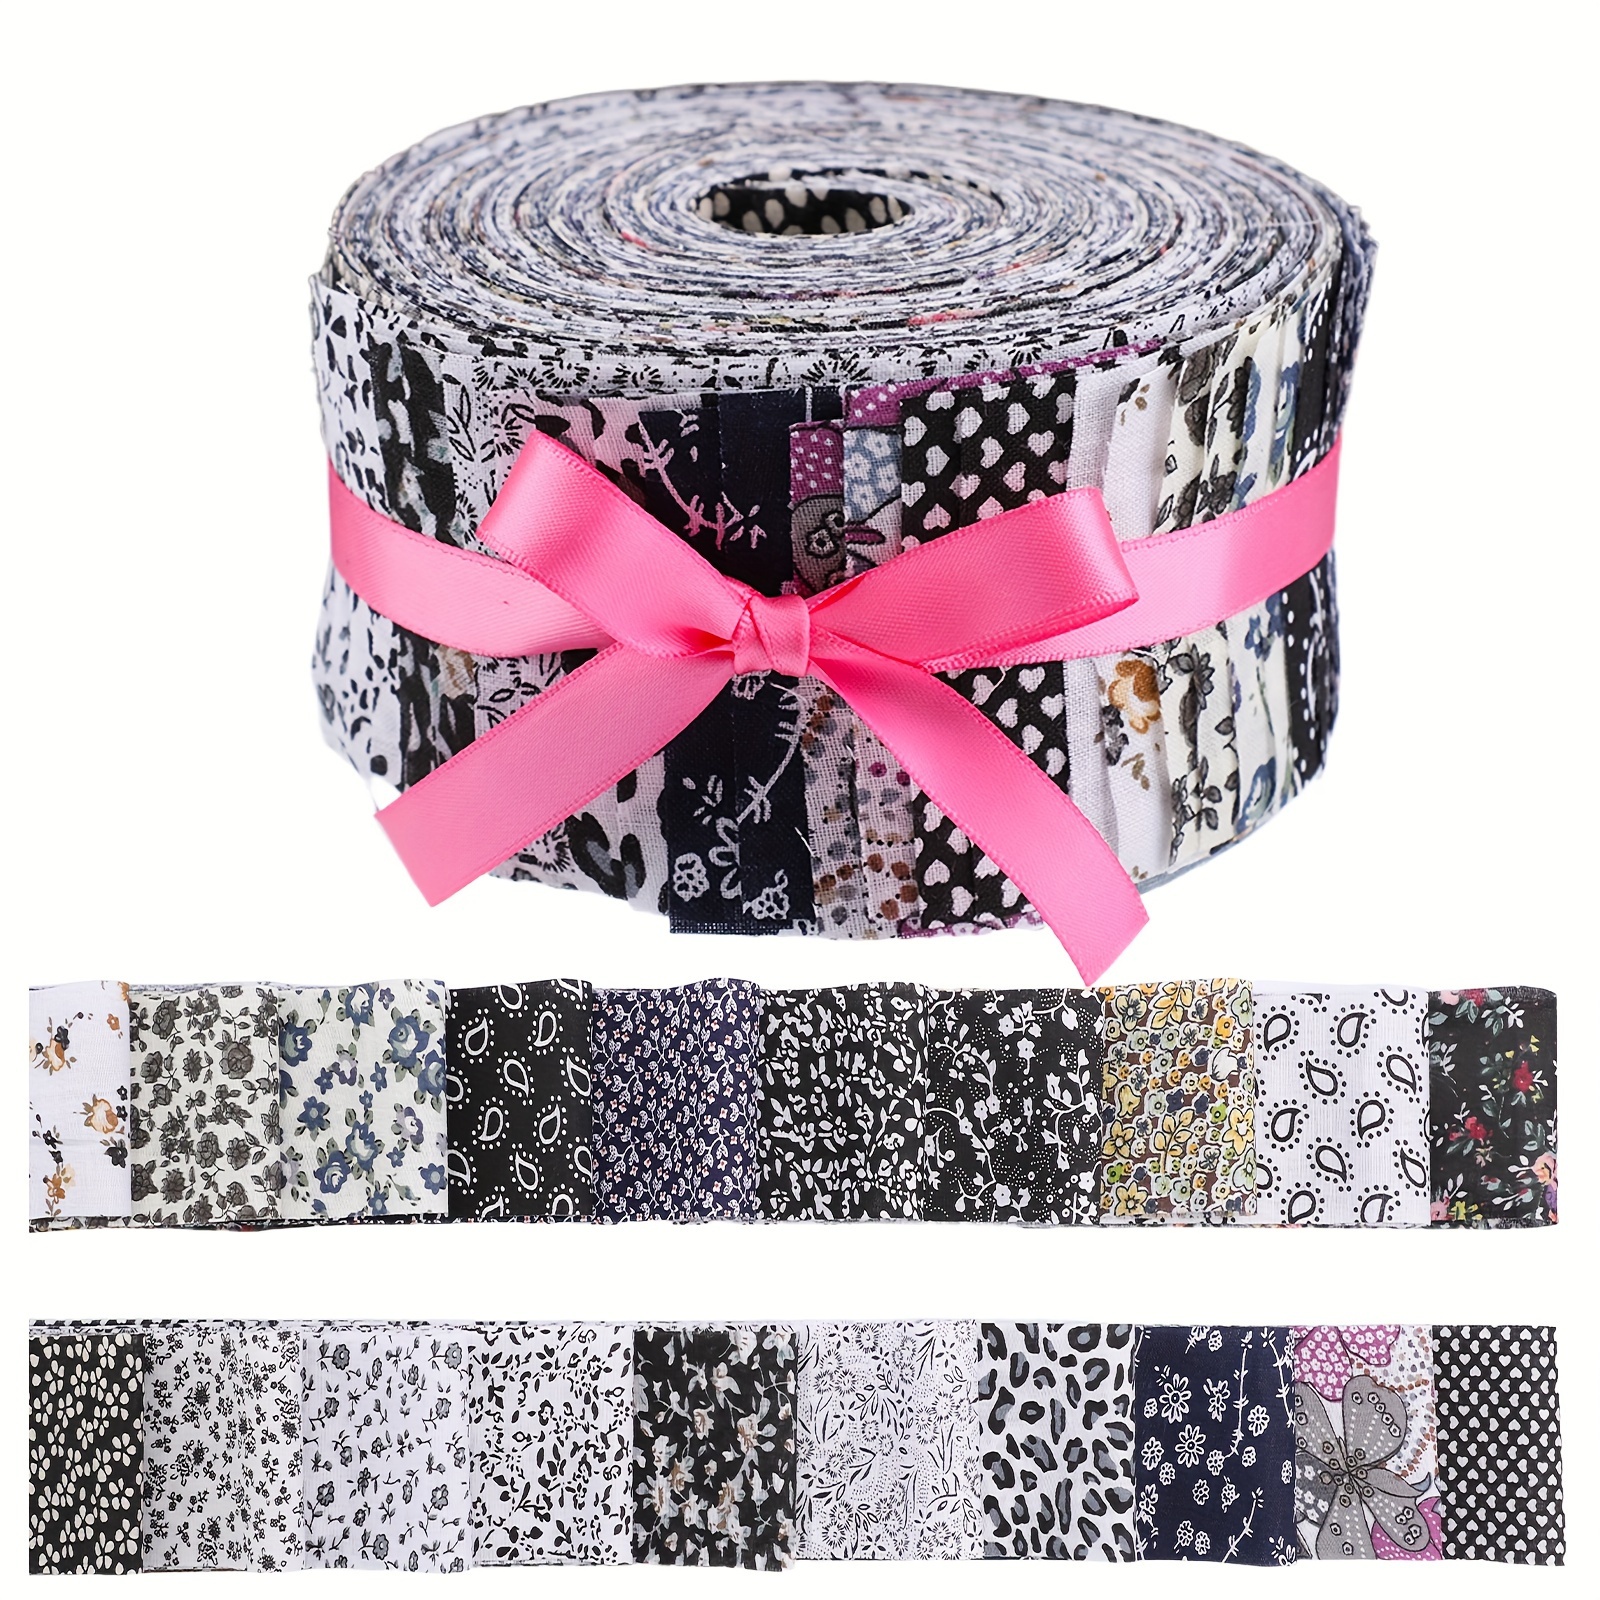 

40pcs Floral Cotton Fabric Patchwork Roll Cotton Quilting Fabric Roll Up Cotton Fabric Quilting Strips 2.55 Inches Precut Patchwork Roll For Craft Sewing Diy Crafts